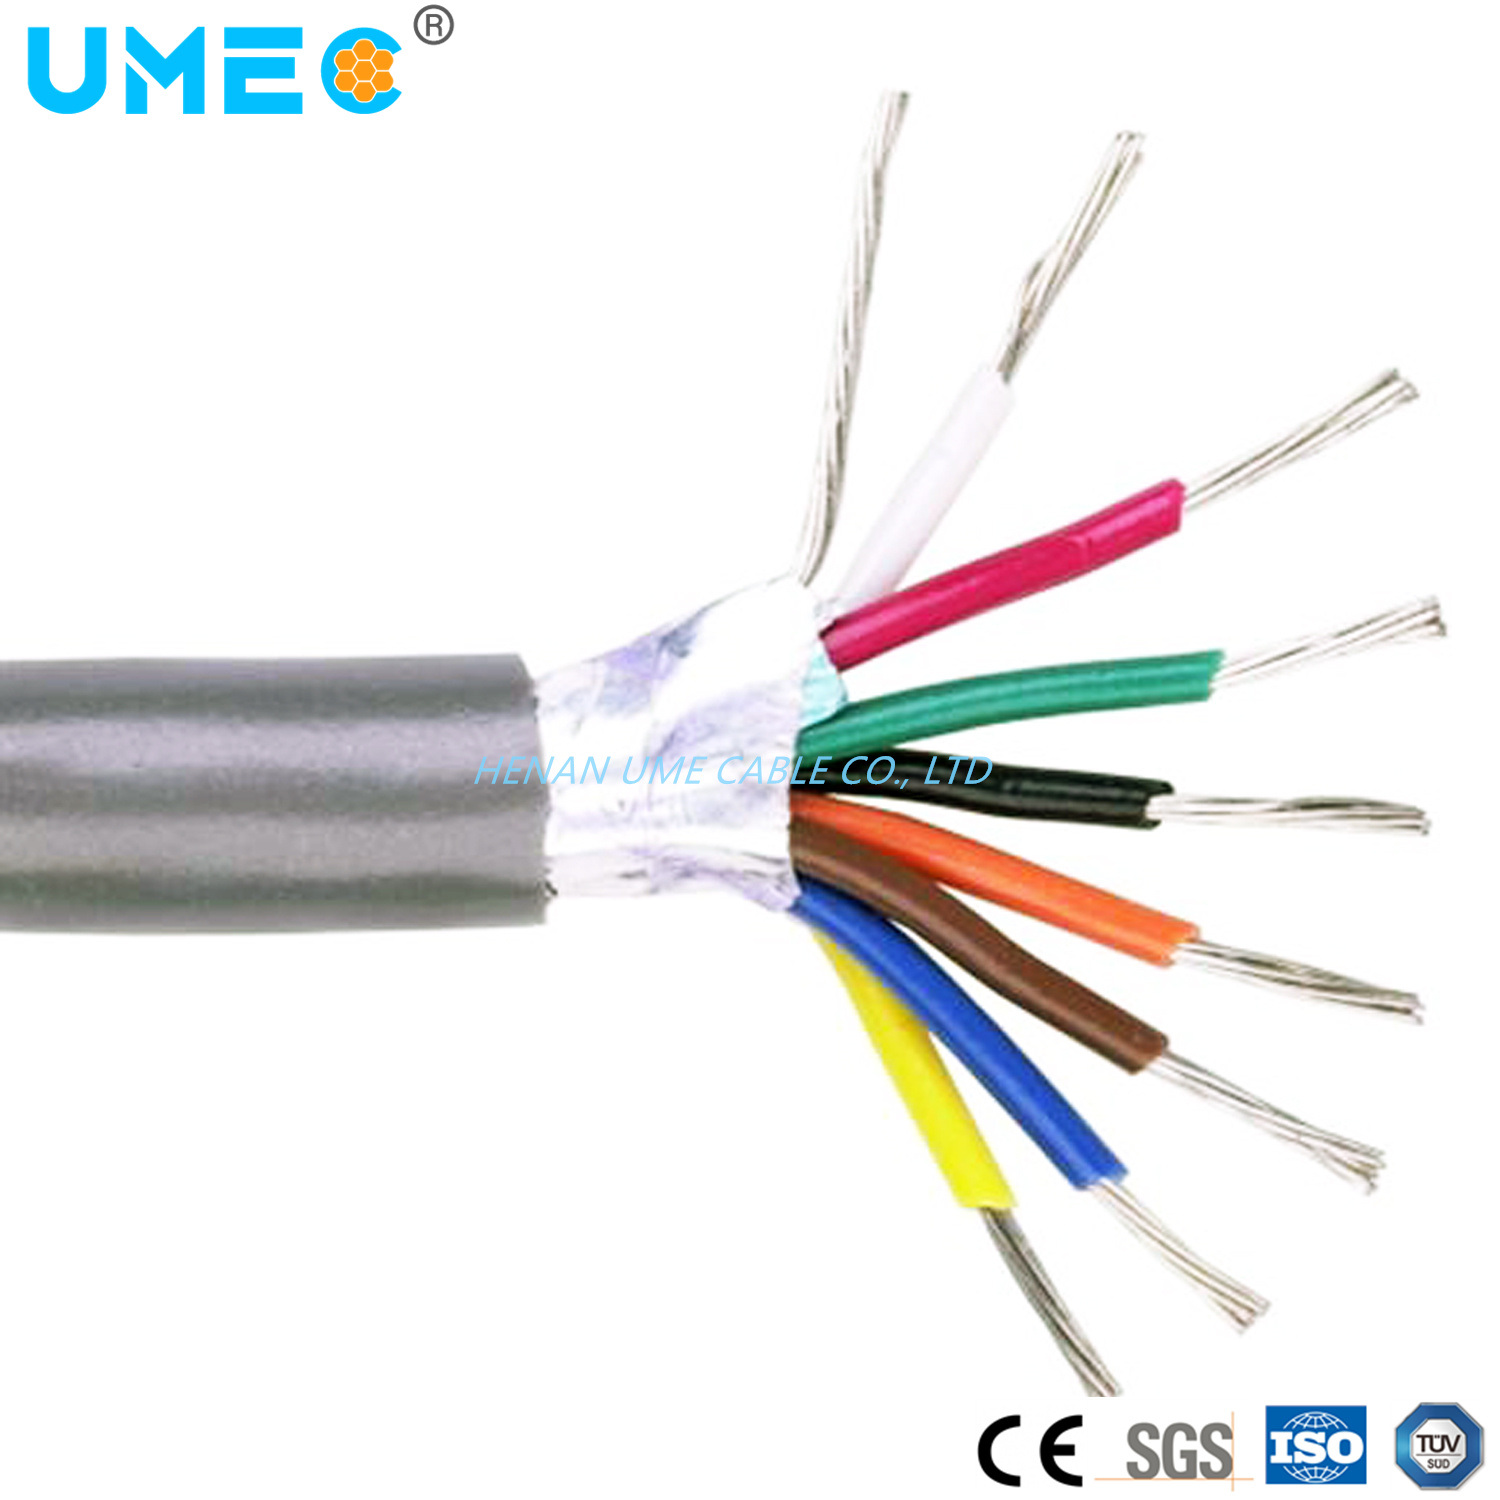 Computer Soft Cable PE Insulation PVC Sheath Copper Wire Braided General Shielding